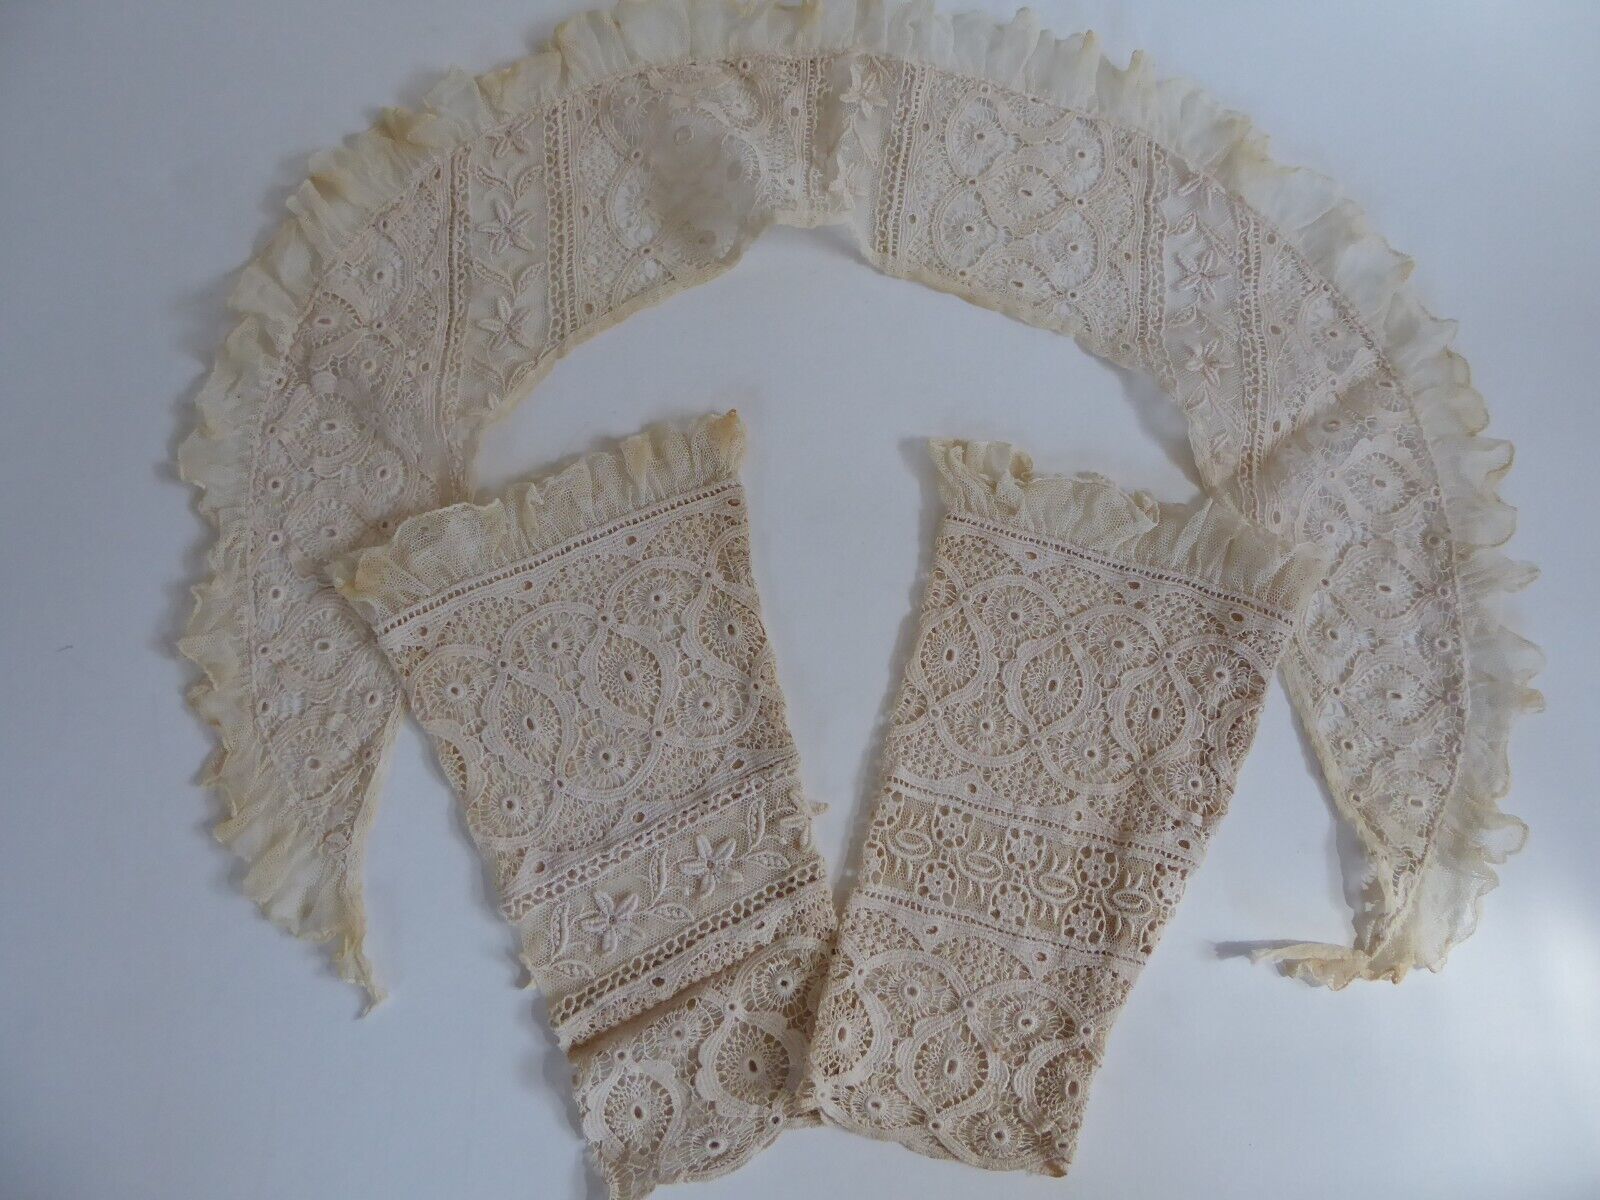 Pair of Antique Victorian Edwardian lace sleeves/cuffs and matching collar